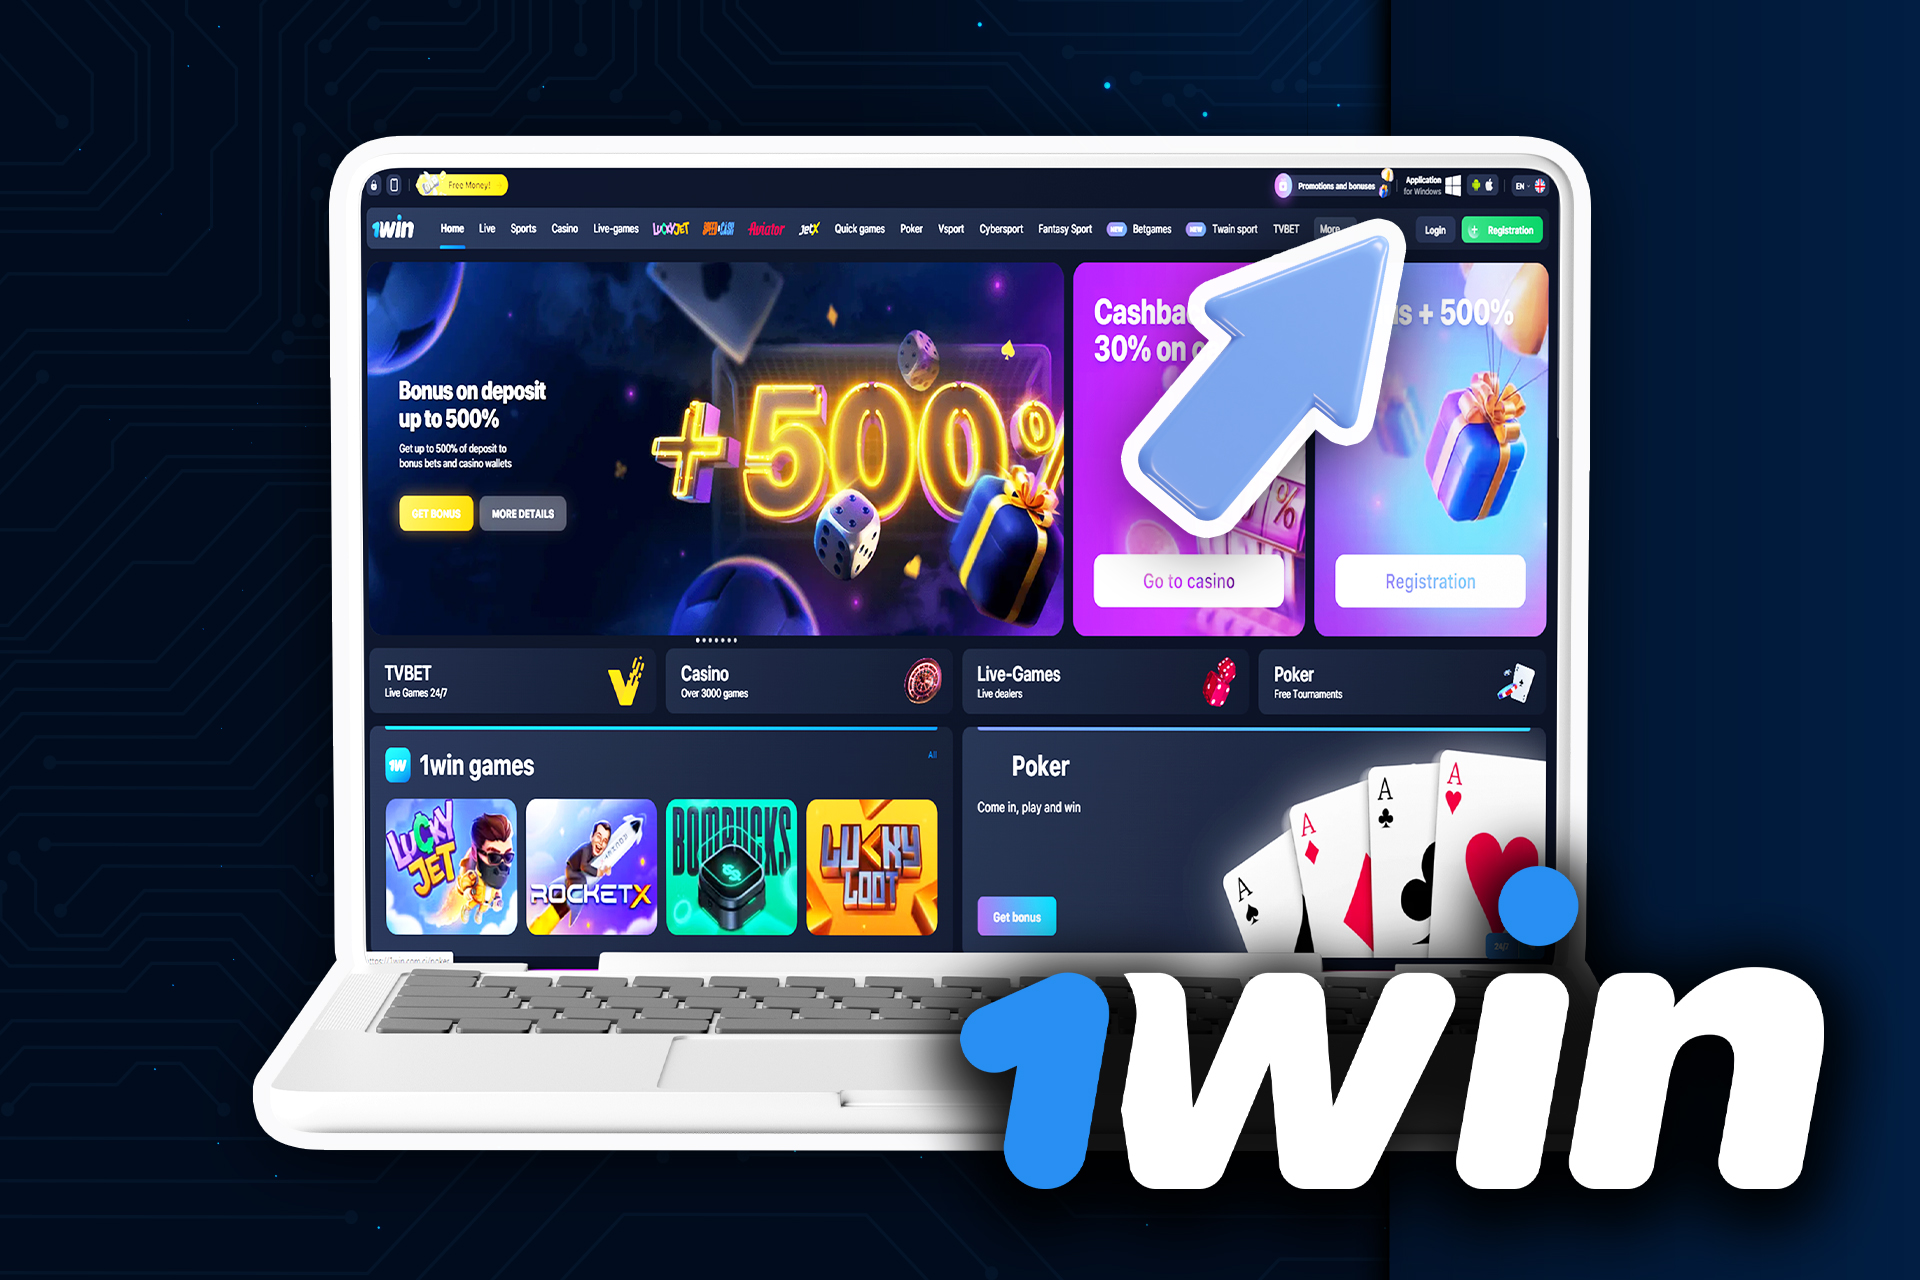 Download the 1win desktop app and bet on your laptop or pc.